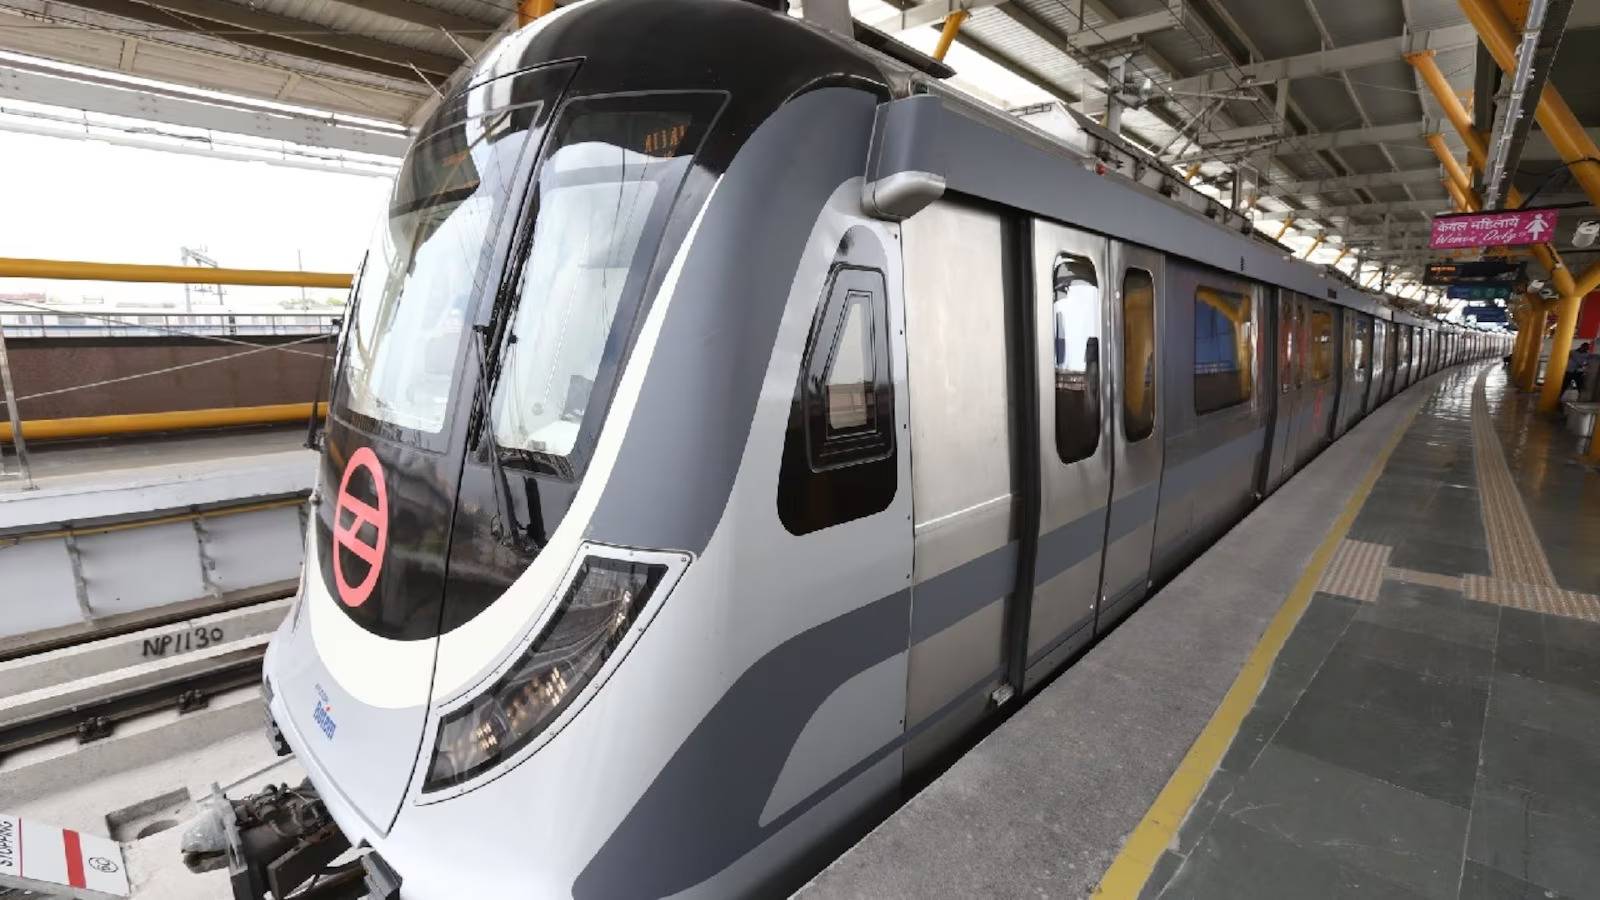 Gurugram’s New Metro may Spur Property Price Increase, Revive Old City